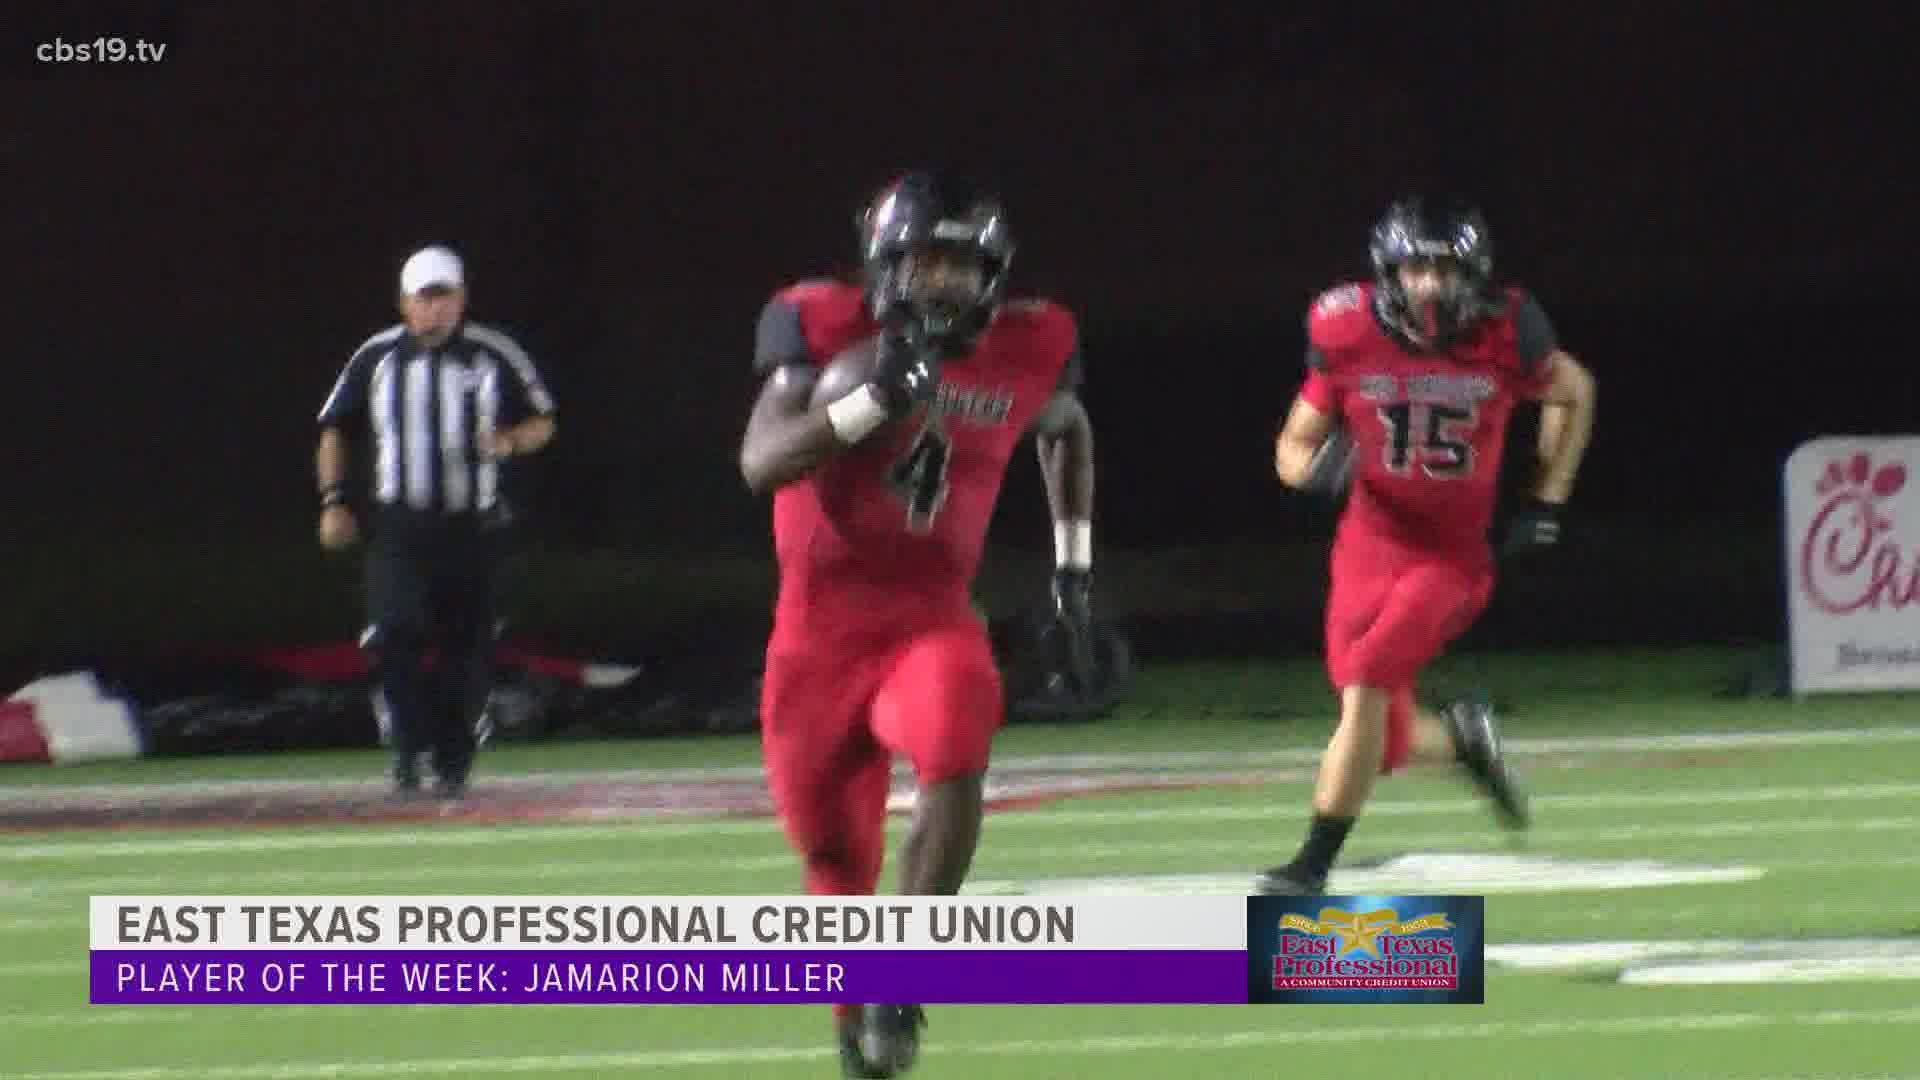 Miller rushed 16 times for 347 yards and four touchdowns against Lufkin in Week 4 of the Texas high school football season.